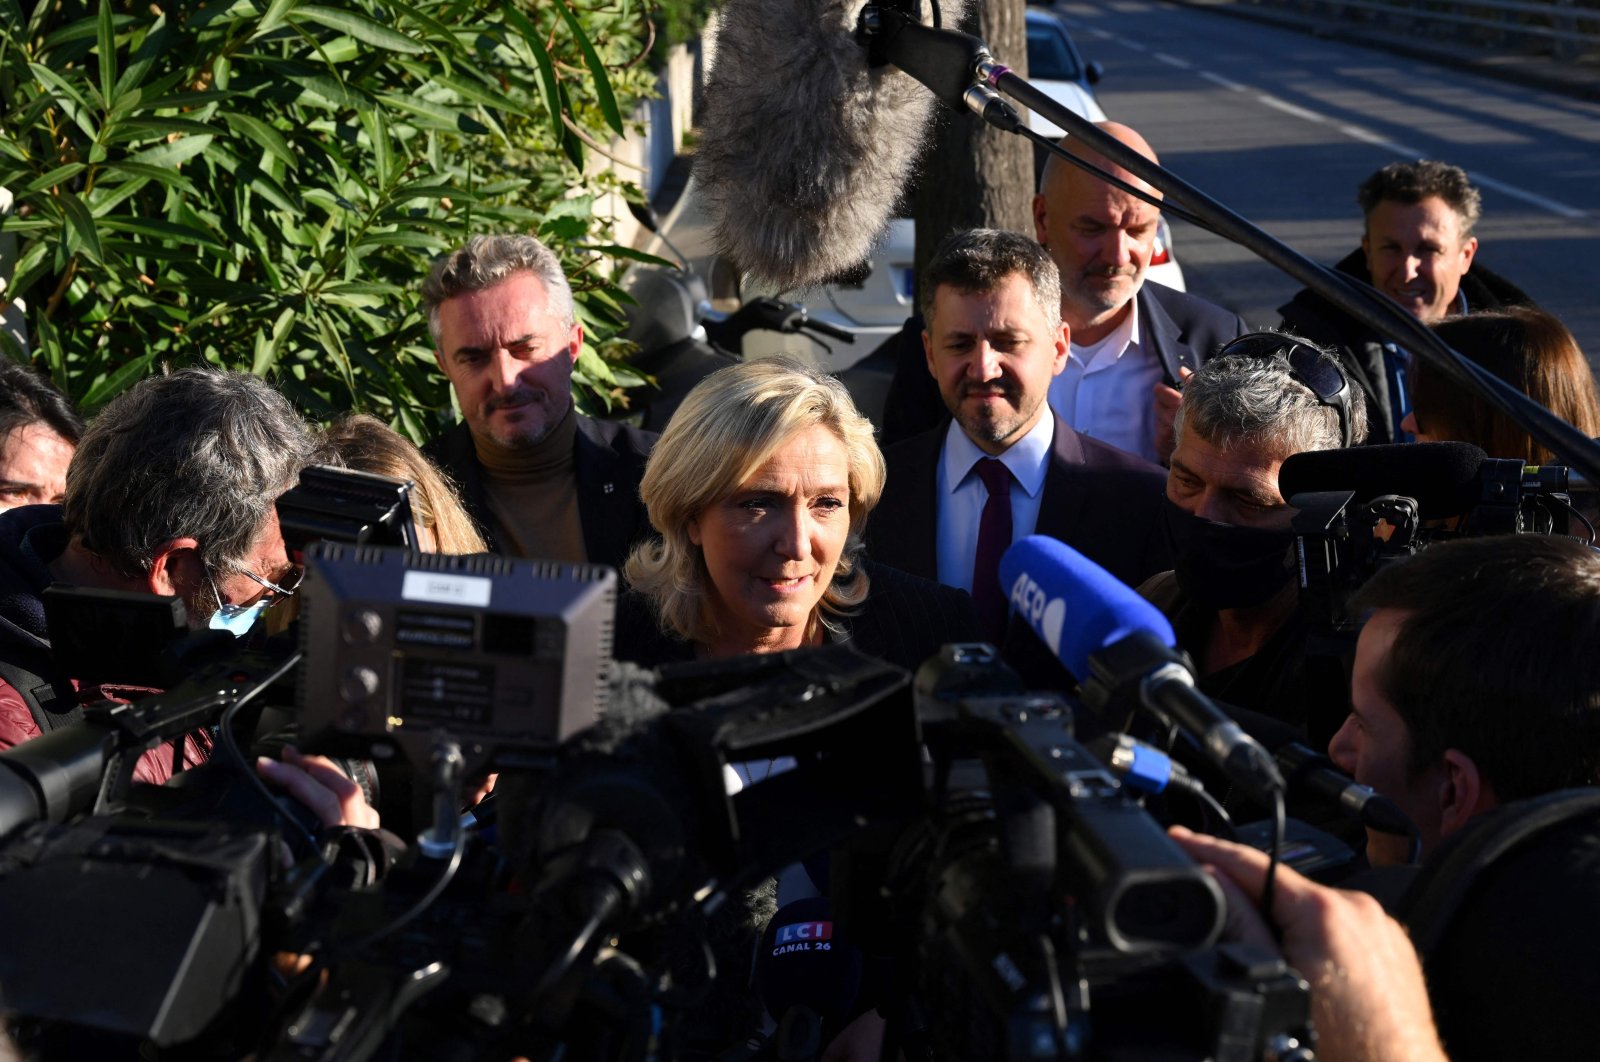 Leader of French far-right party Rassemblement National (RN) and candidate for the 2022 French presidential election Marine Le Pen (C) answers journalists&#039; questions after visiting a police station in the northern neighborhoods of Marseille, France, on Nov. 19, 2021. (AFP Photo)